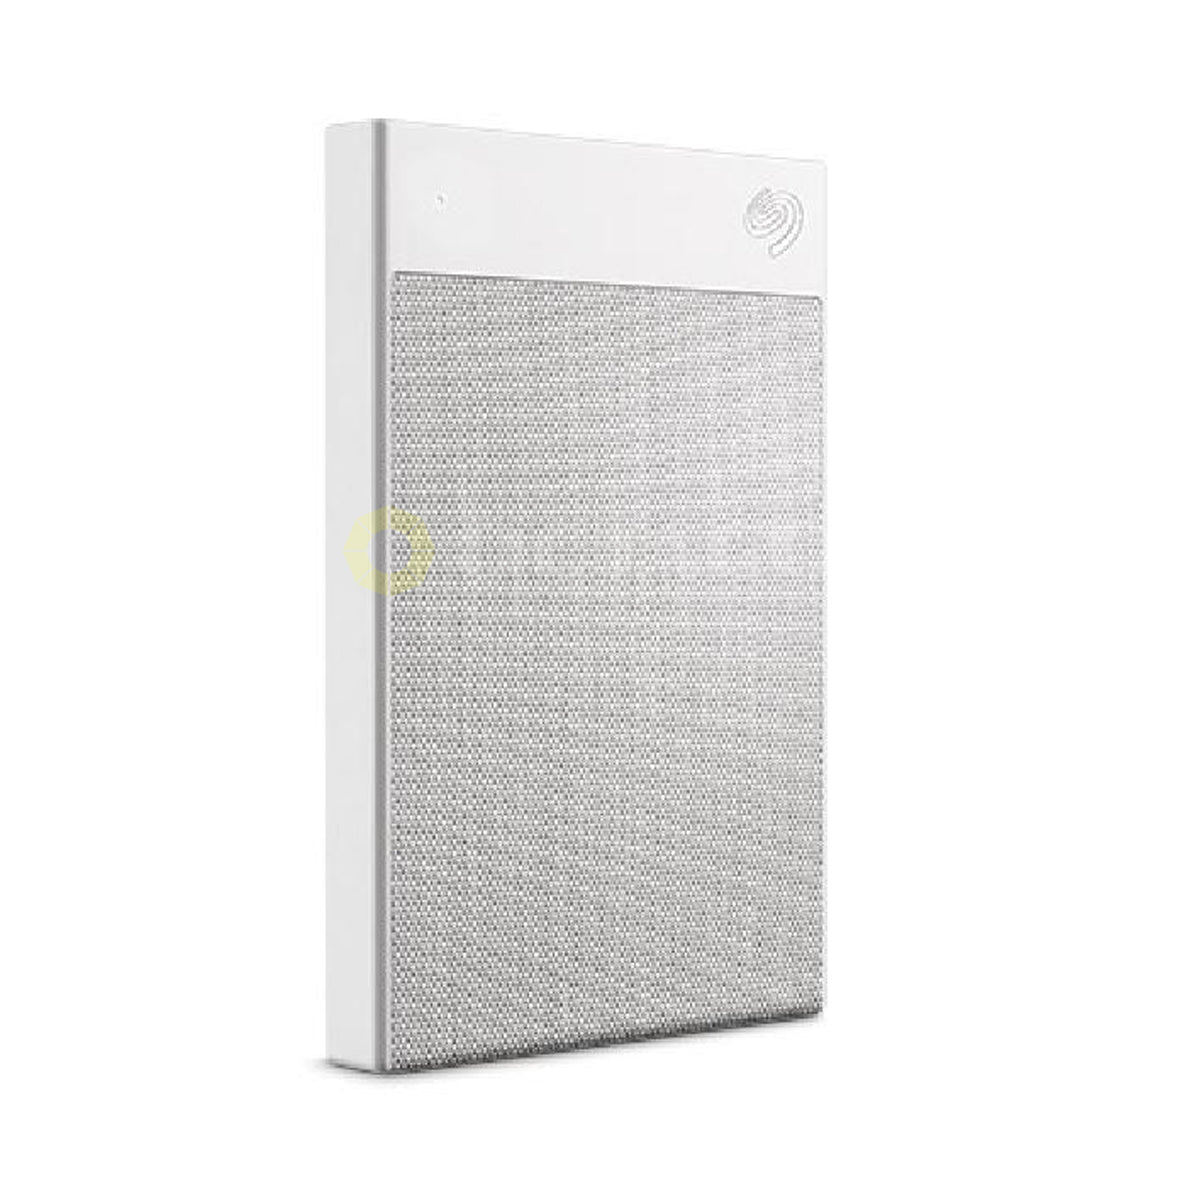 SEAGATE ULTRA TOUCH WHITE